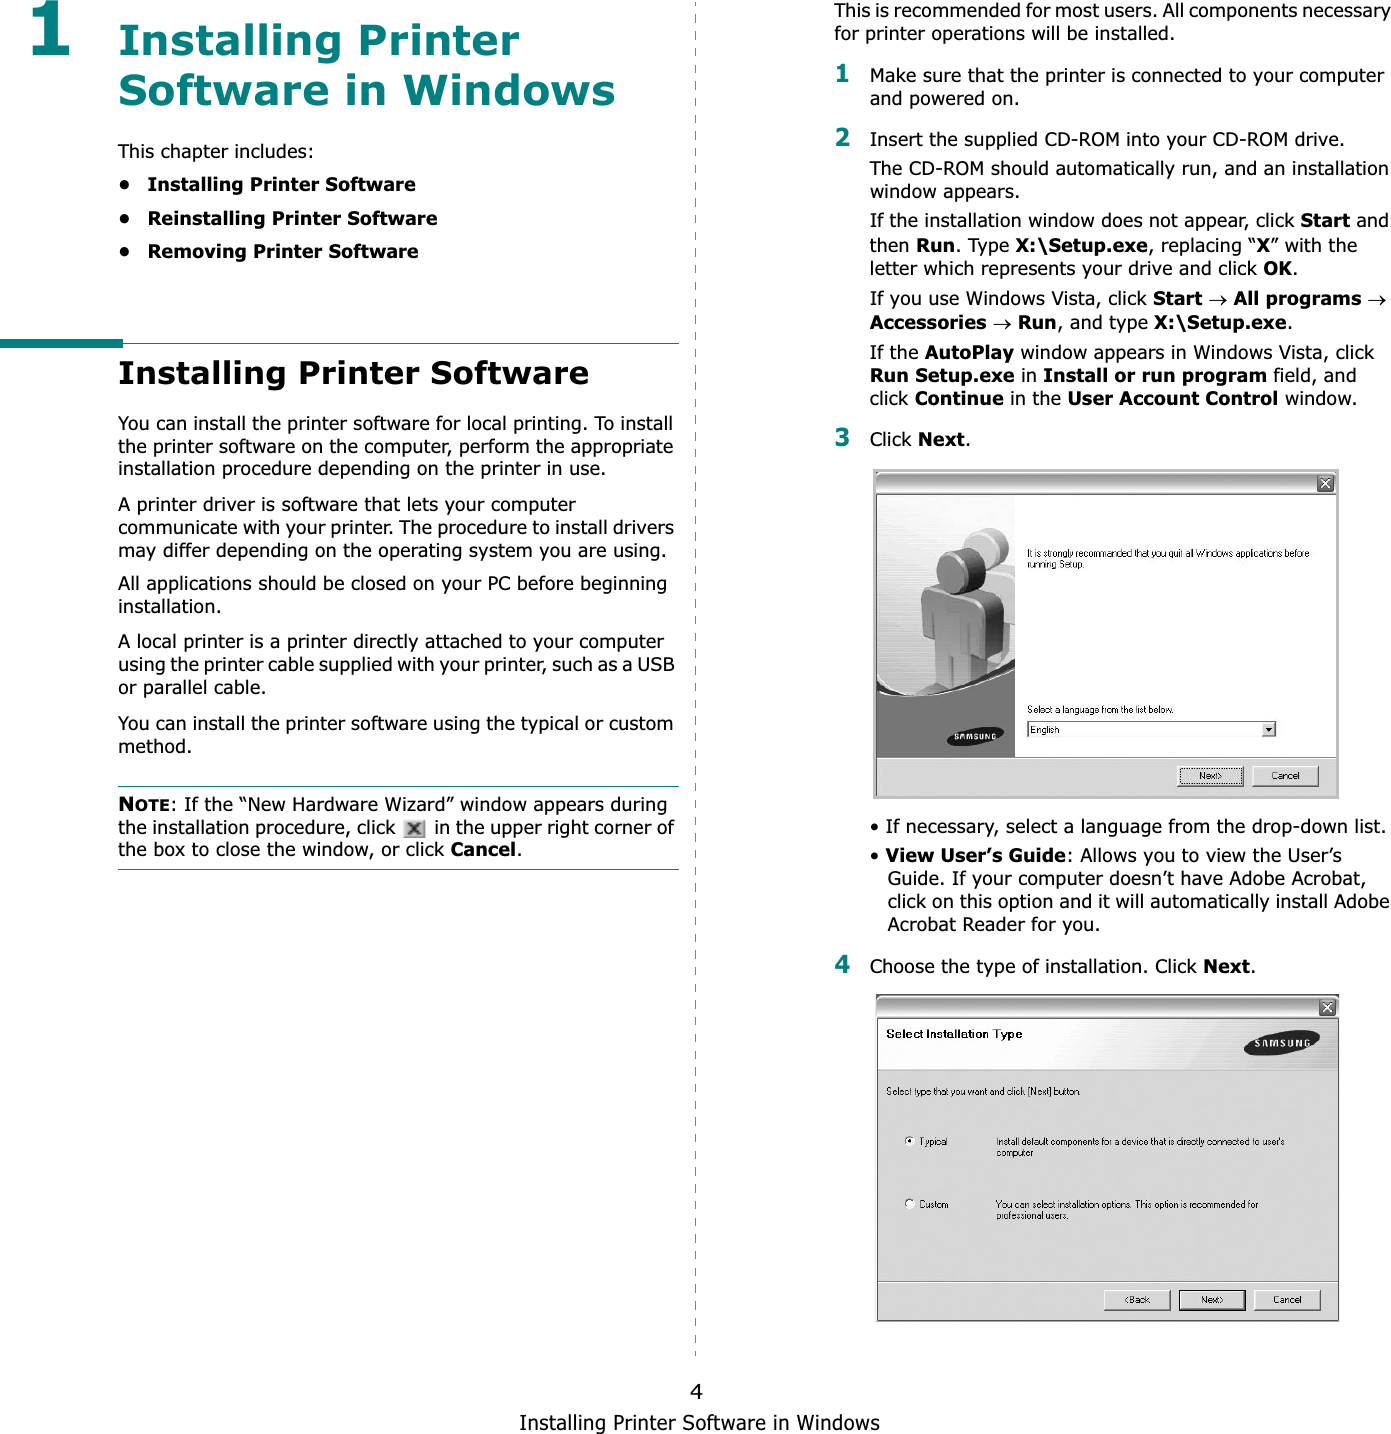 Installing Printer Software in Windows41Installing Printer Software in WindowsThis chapter includes:• Installing Printer Software• Reinstalling Printer Software•Removing Printer SoftwareInstalling Printer SoftwareYou can install the printer software for local printing. To install the printer software on the computer, perform the appropriate installation procedure depending on the printer in use.A printer driver is software that lets your computer communicate with your printer. The procedure to install drivers may differ depending on the operating system you are using.All applications should be closed on your PC before beginning installation. A local printer is a printer directly attached to your computer using the printer cable supplied with your printer, such as a USB or parallel cable.You can install the printer software using the typical or custom method.NOTE: If the “New Hardware Wizard” window appears during the installation procedure, click   in the upper right corner of the box to close the window, or click Cancel.This is recommended for most users. All components necessary for printer operations will be installed.1Make sure that the printer is connected to your computer and powered on.2Insert the supplied CD-ROM into your CD-ROM drive.The CD-ROM should automatically run, and an installation window appears.If the installation window does not appear, click Start and then Run. Type X:\Setup.exe, replacing “X” with the letter which represents your drive and click OK.If you use Windows Vista, click StartoAll programsoAccessoriesoRun, and type X:\Setup.exe.If the AutoPlay window appears in Windows Vista, click Run Setup.exe in Install or run program field, and clickContinue in the User Account Control window.3Click Next.• If necessary, select a language from the drop-down list.•View User’s Guide: Allows you to view the User’s Guide. If your computer doesn’t have Adobe Acrobat, click on this option and it will automatically install Adobe Acrobat Reader for you.4Choose the type of installation. Click Next.